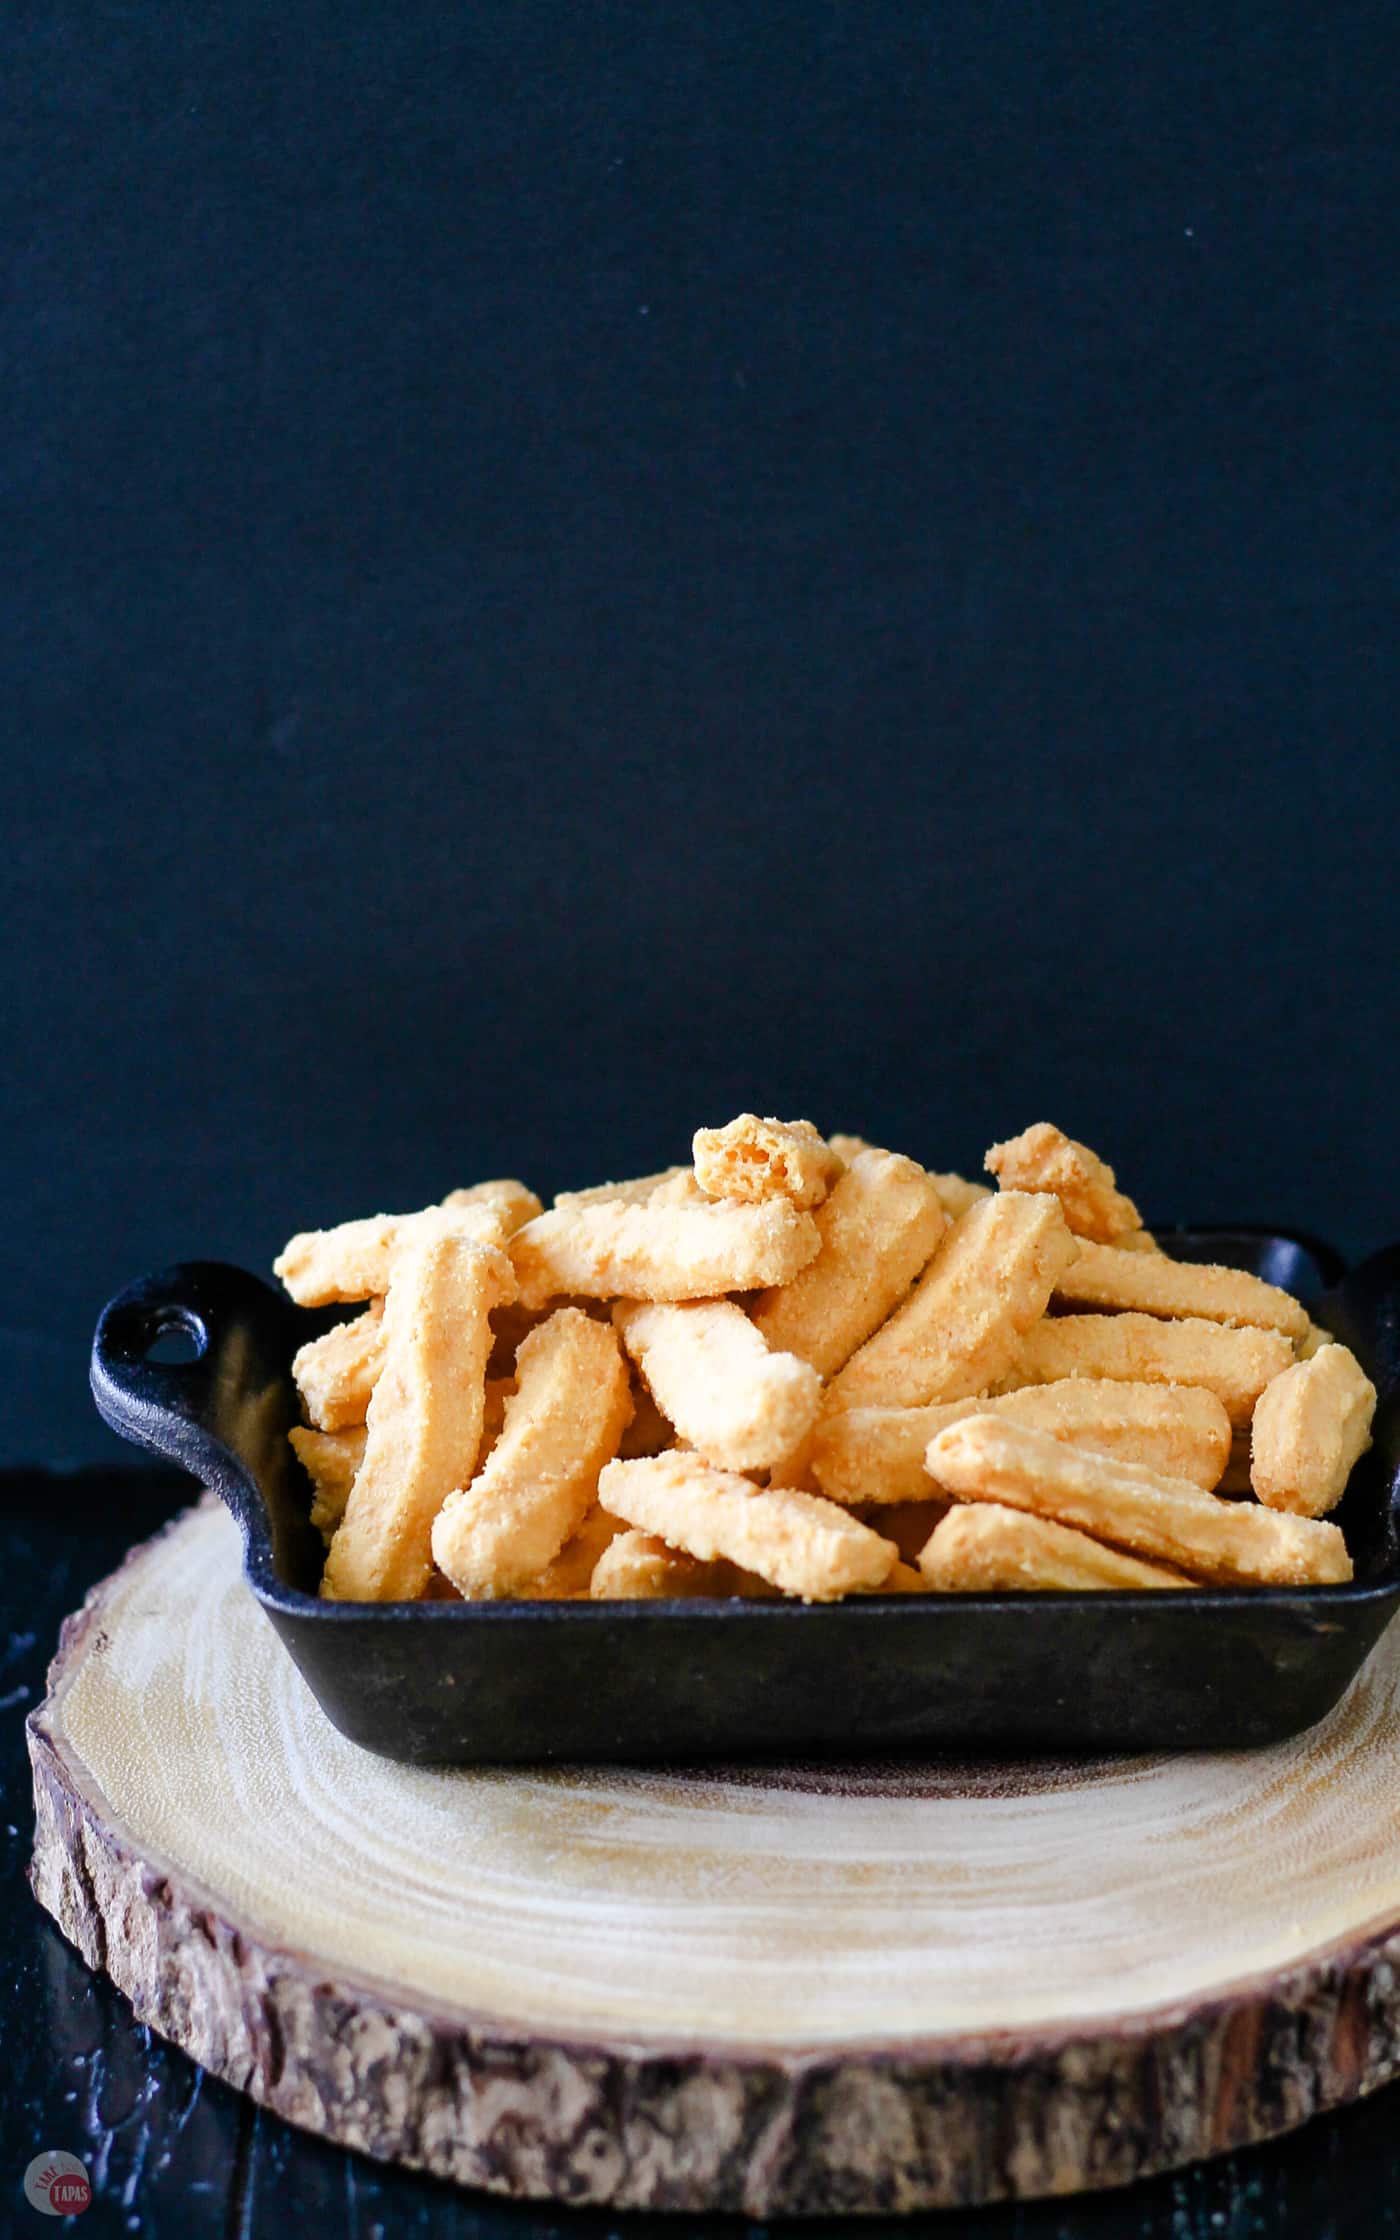 Cast iron pan with pimento cheese straws in it